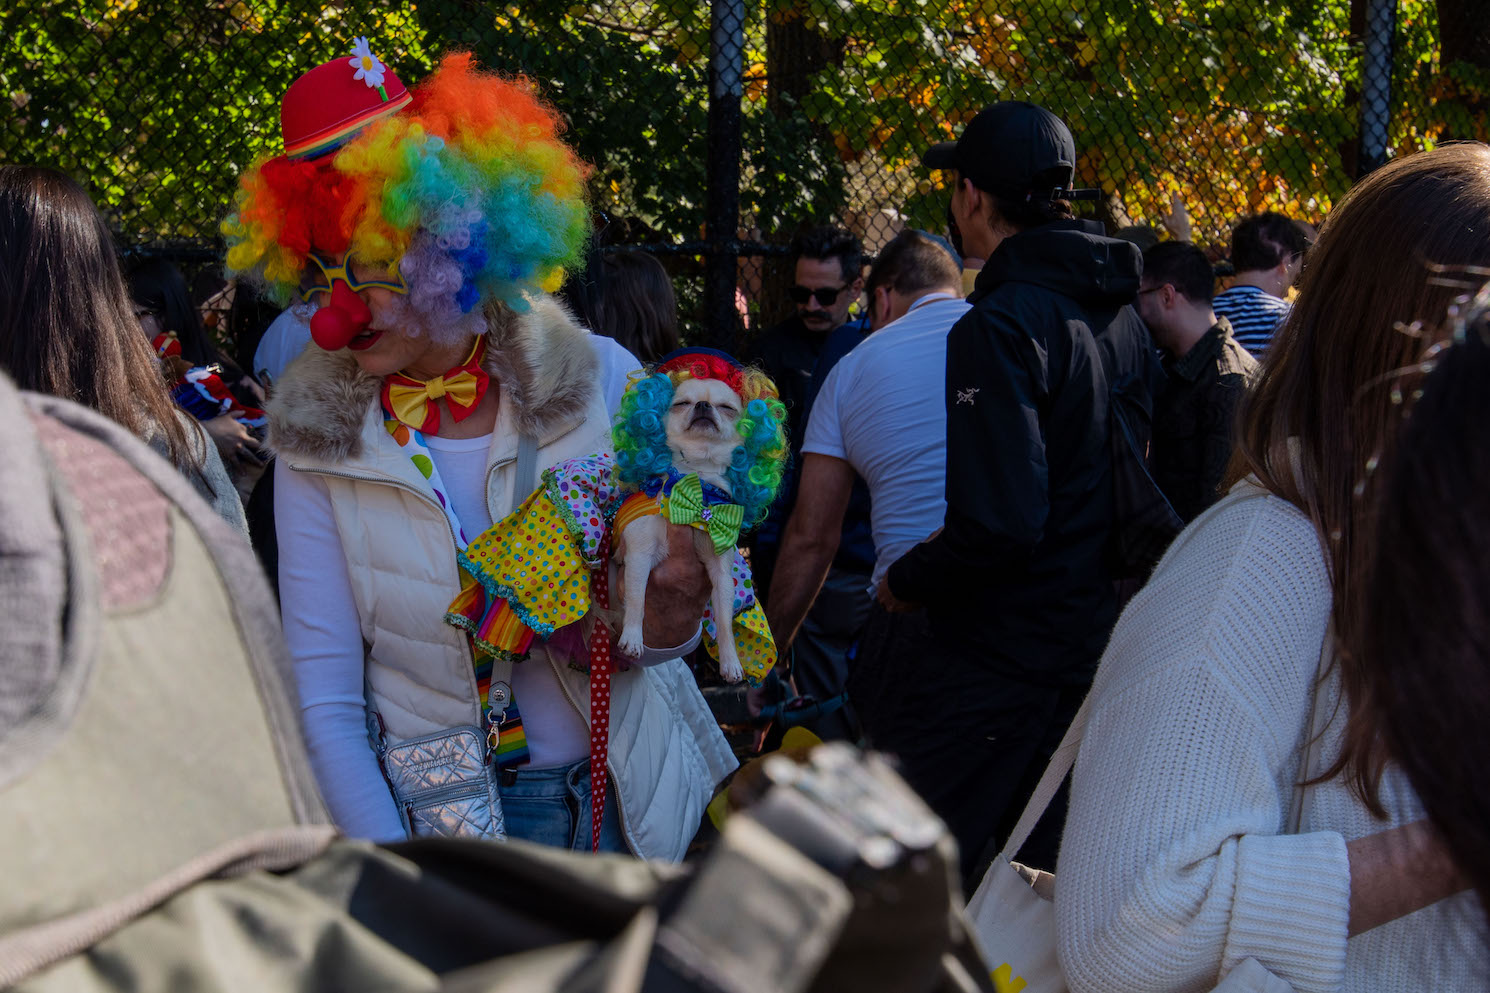 A person in the crowd wears a rainbow clown wig and accessories. They hold a white chihuahua that wears a matching costume.